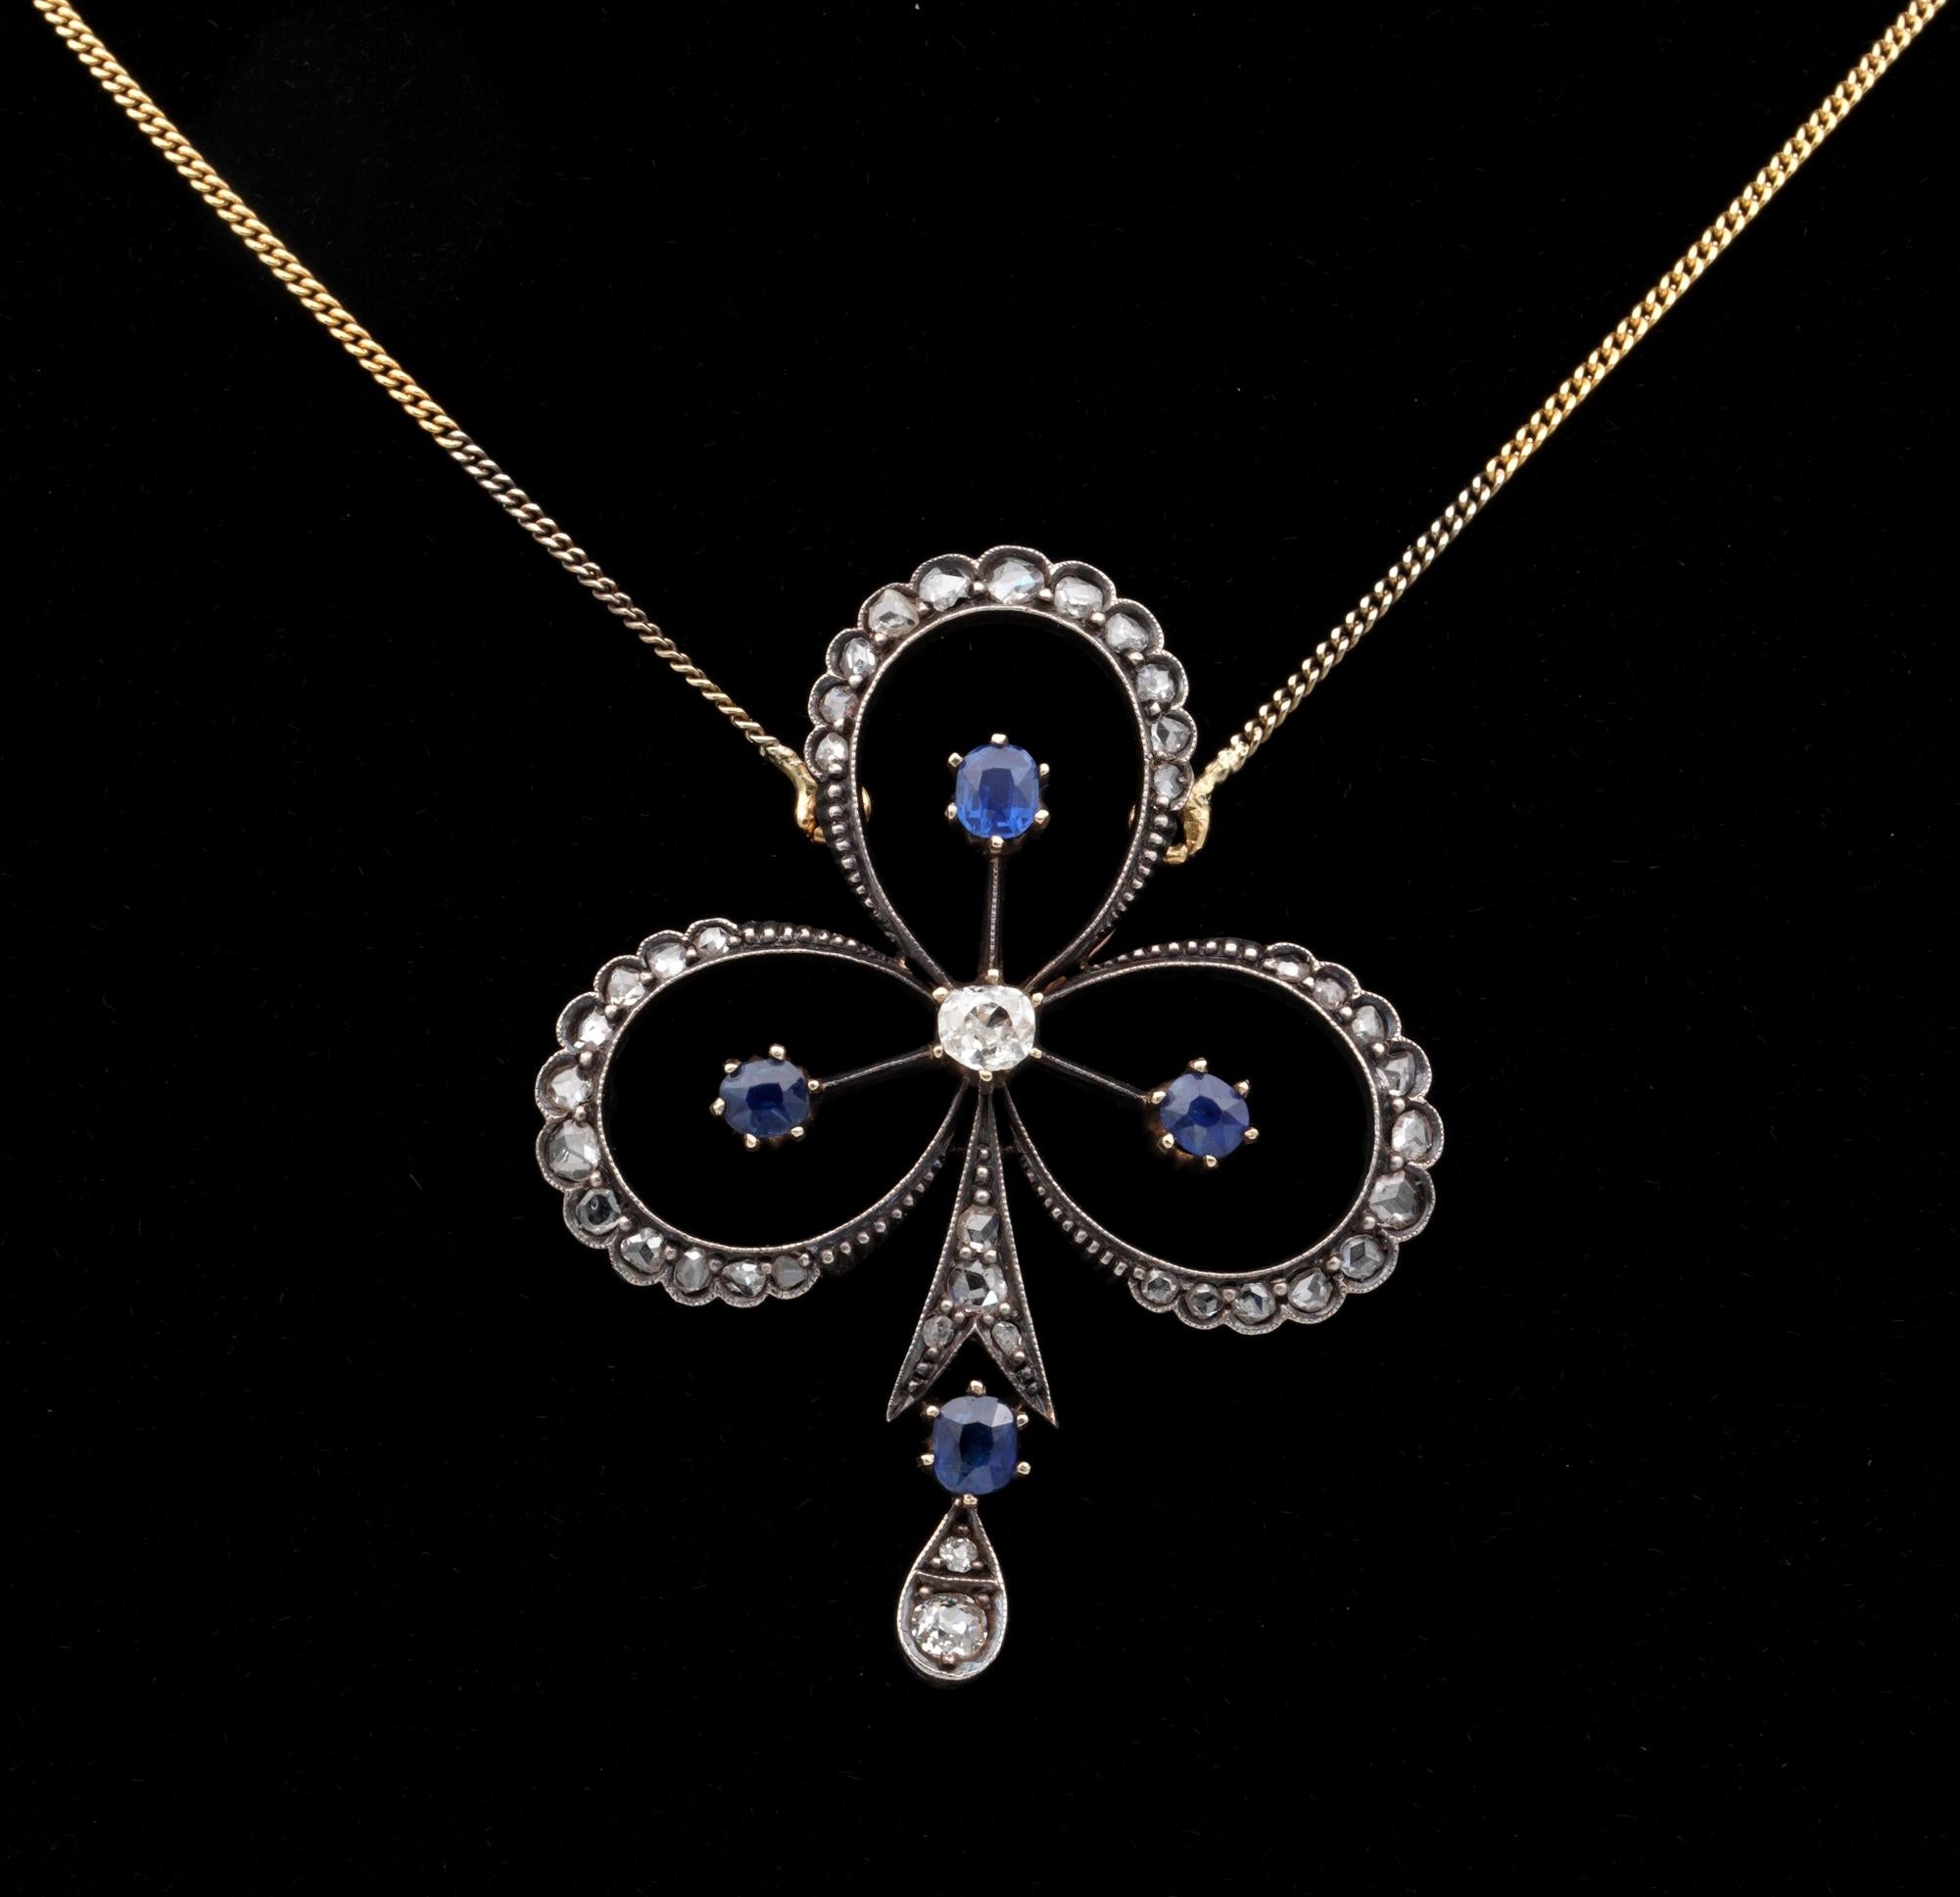 Oval Cut Victorian 1.20 Diamond 1.20 Natural Sapphire Clover Brooch Pendant Necklace For Sale